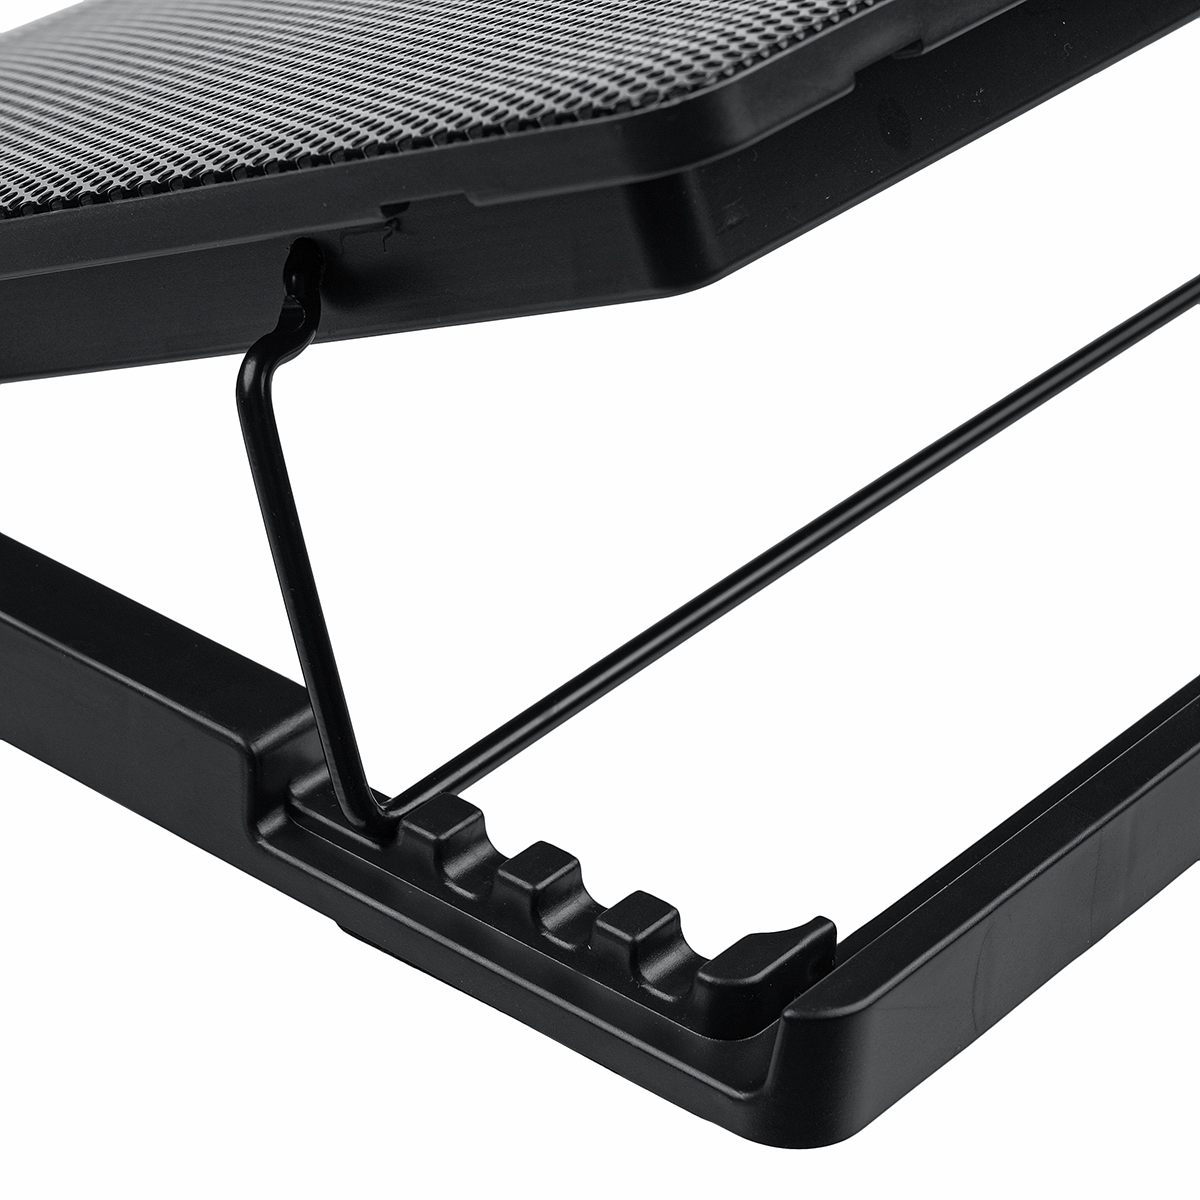 Find 6 Fan Adjustable Laptop Cooling Pad Cooler Portable Stand For 14 17inch Laptop for Sale on Gipsybee.com with cryptocurrencies